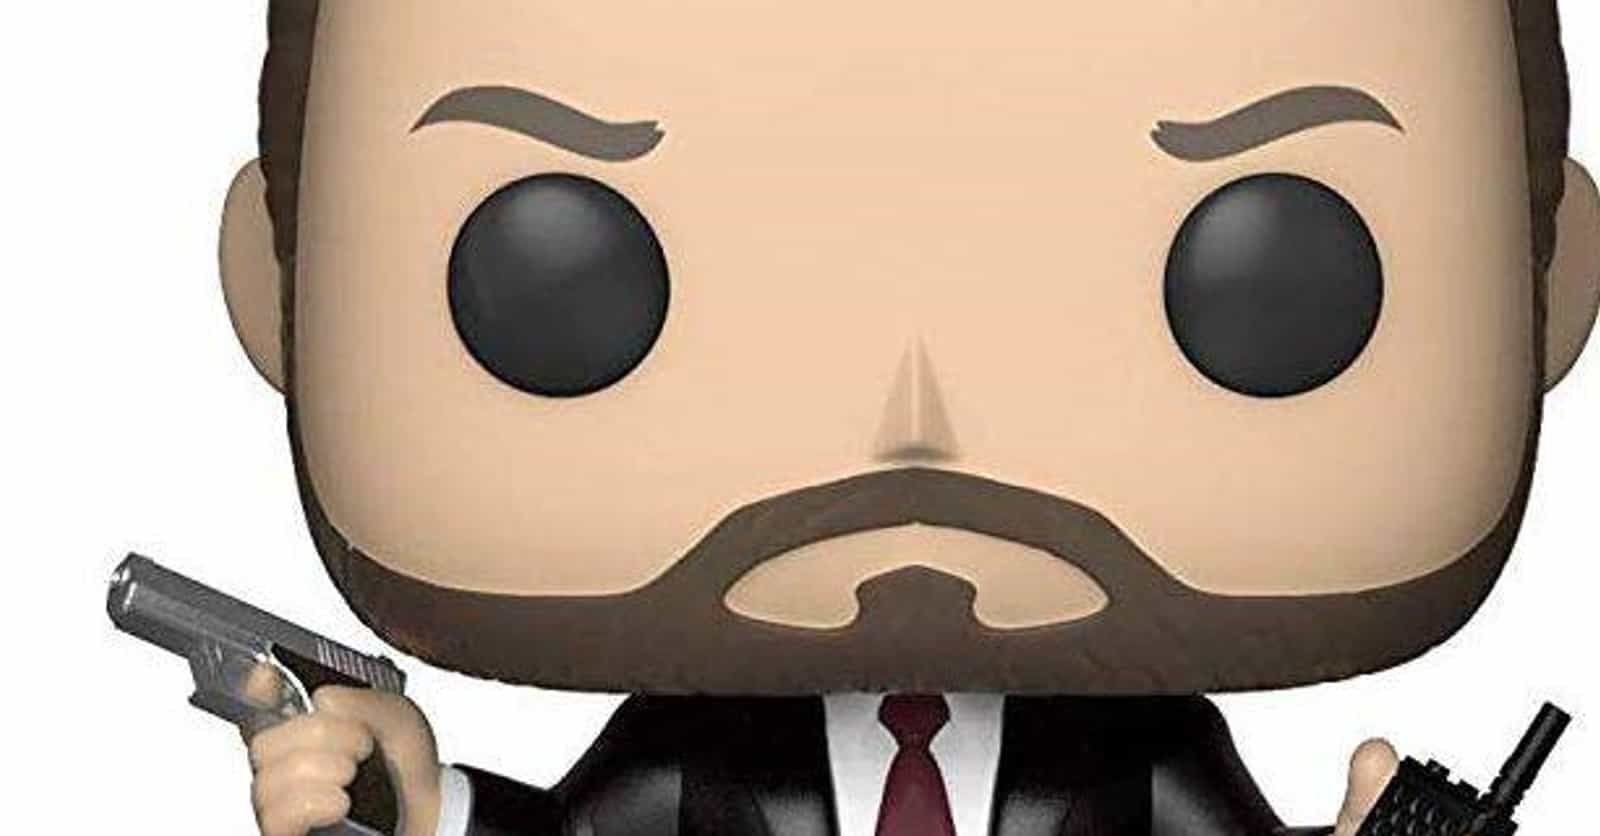 The Most Respectable Funkos For The Classy Film Buff